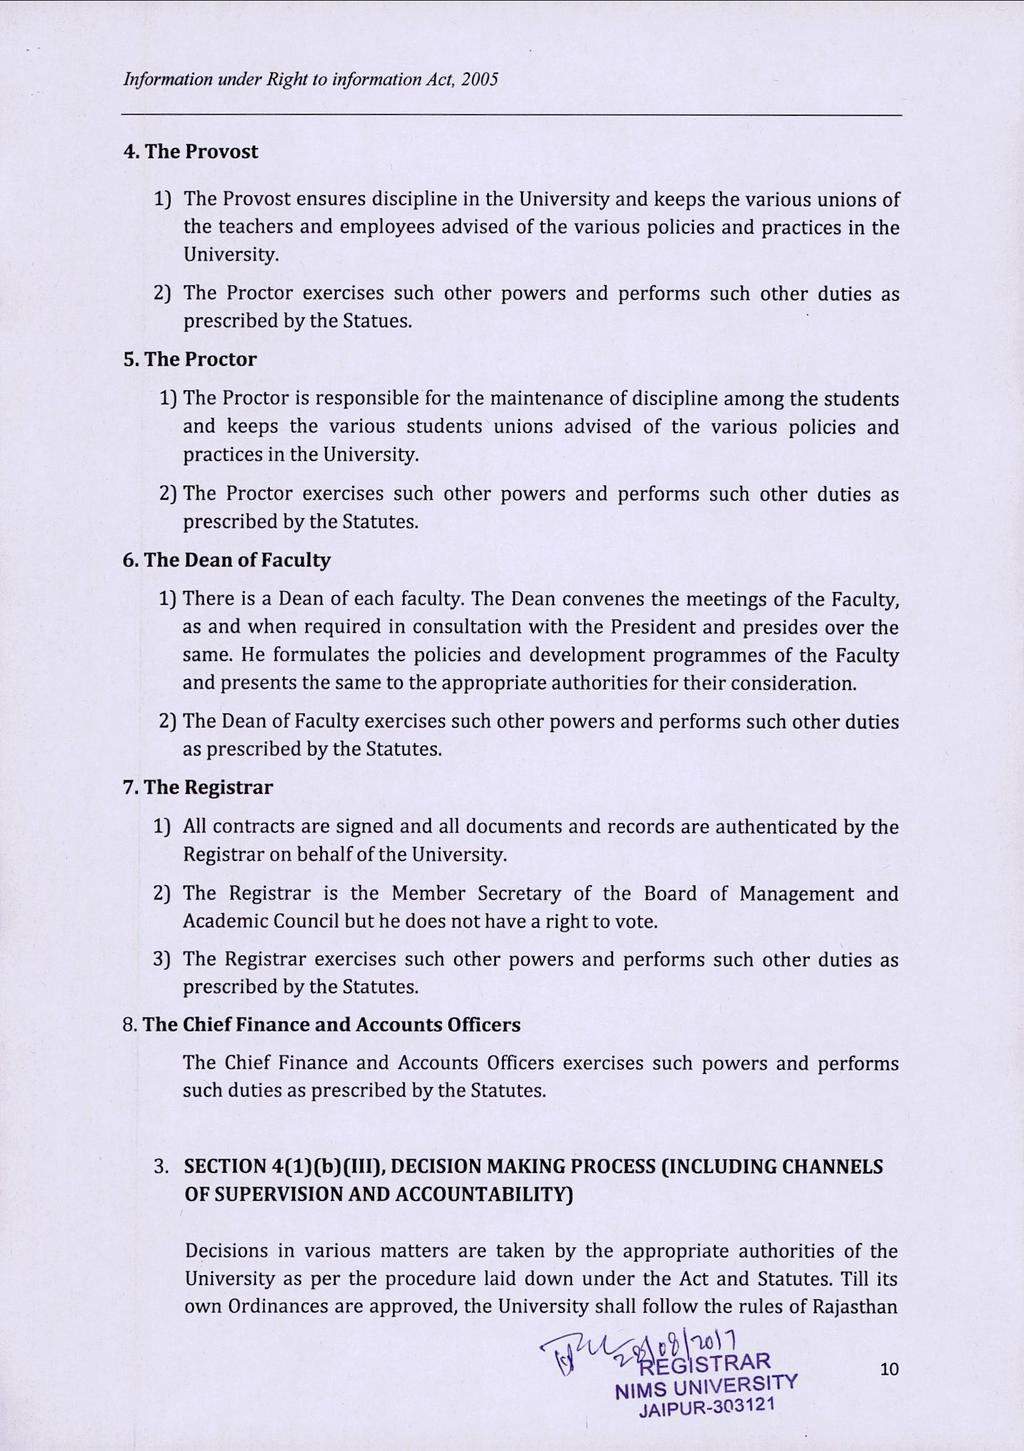 4. The Provost 1) The Provost ensures discipline in the University and keeps the various unions of the teachers and employees advised of the various policies and practices in the University.